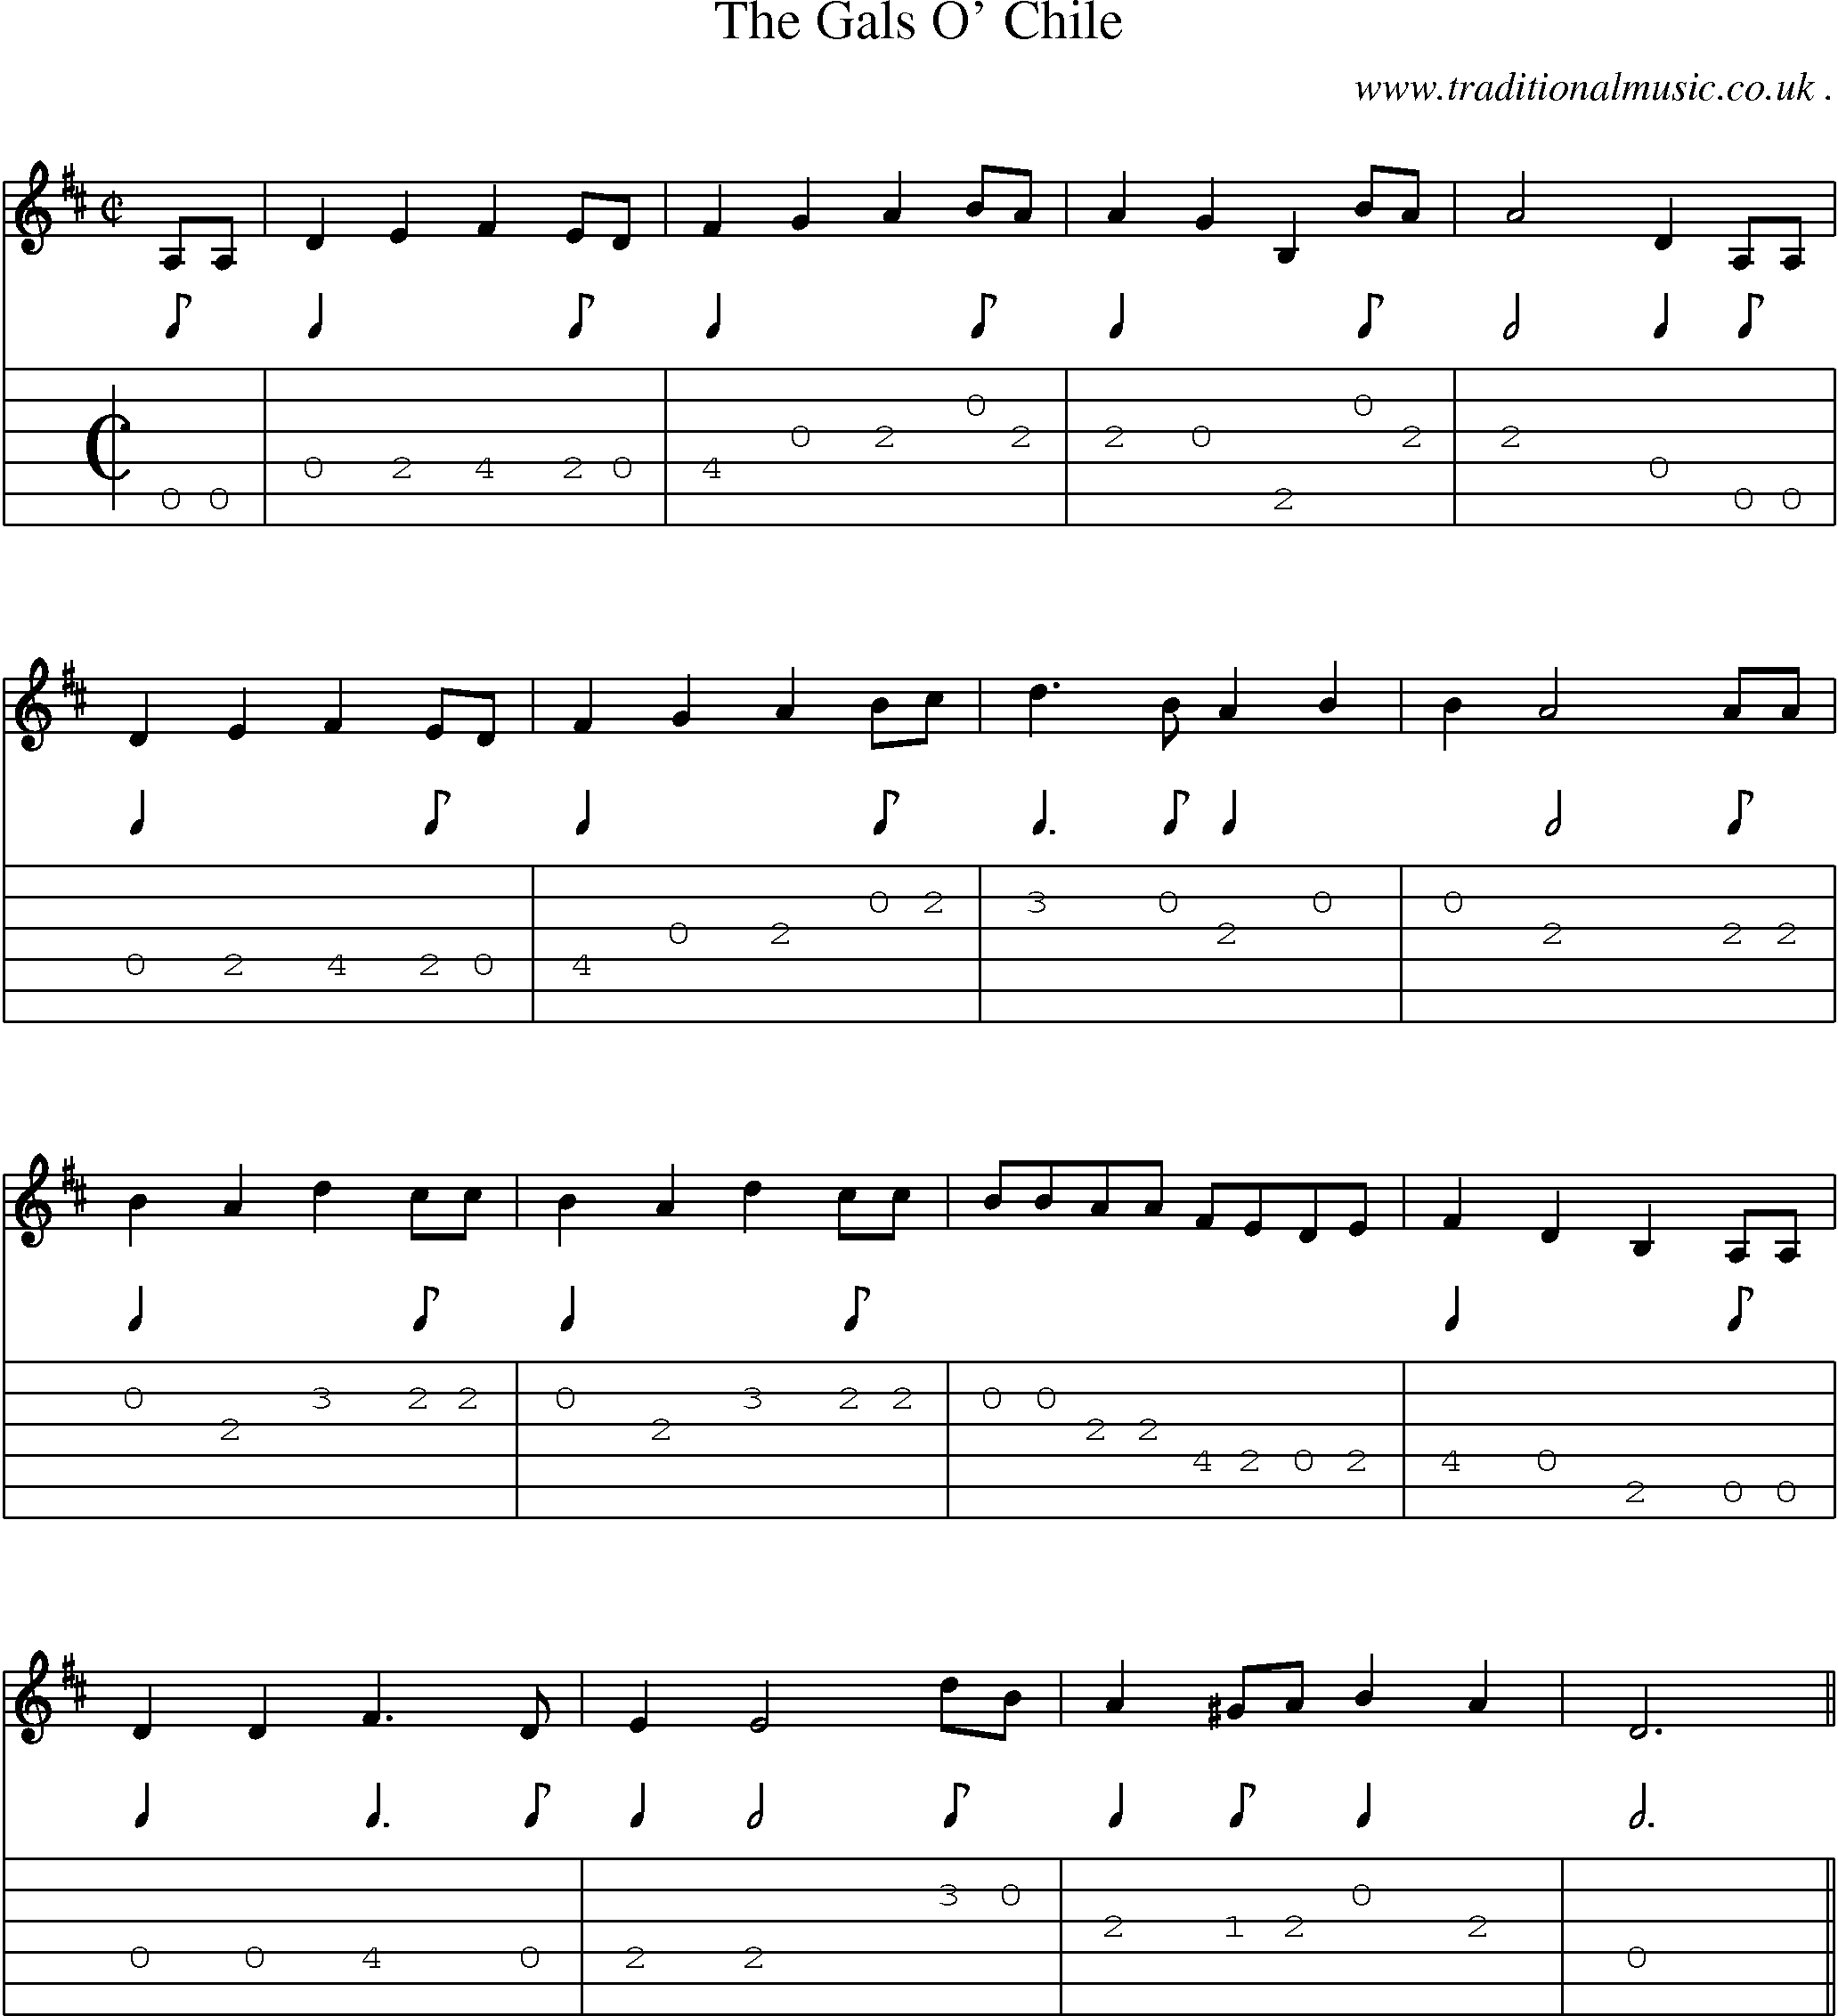 Sheet-Music and Guitar Tabs for The Gals O Chile